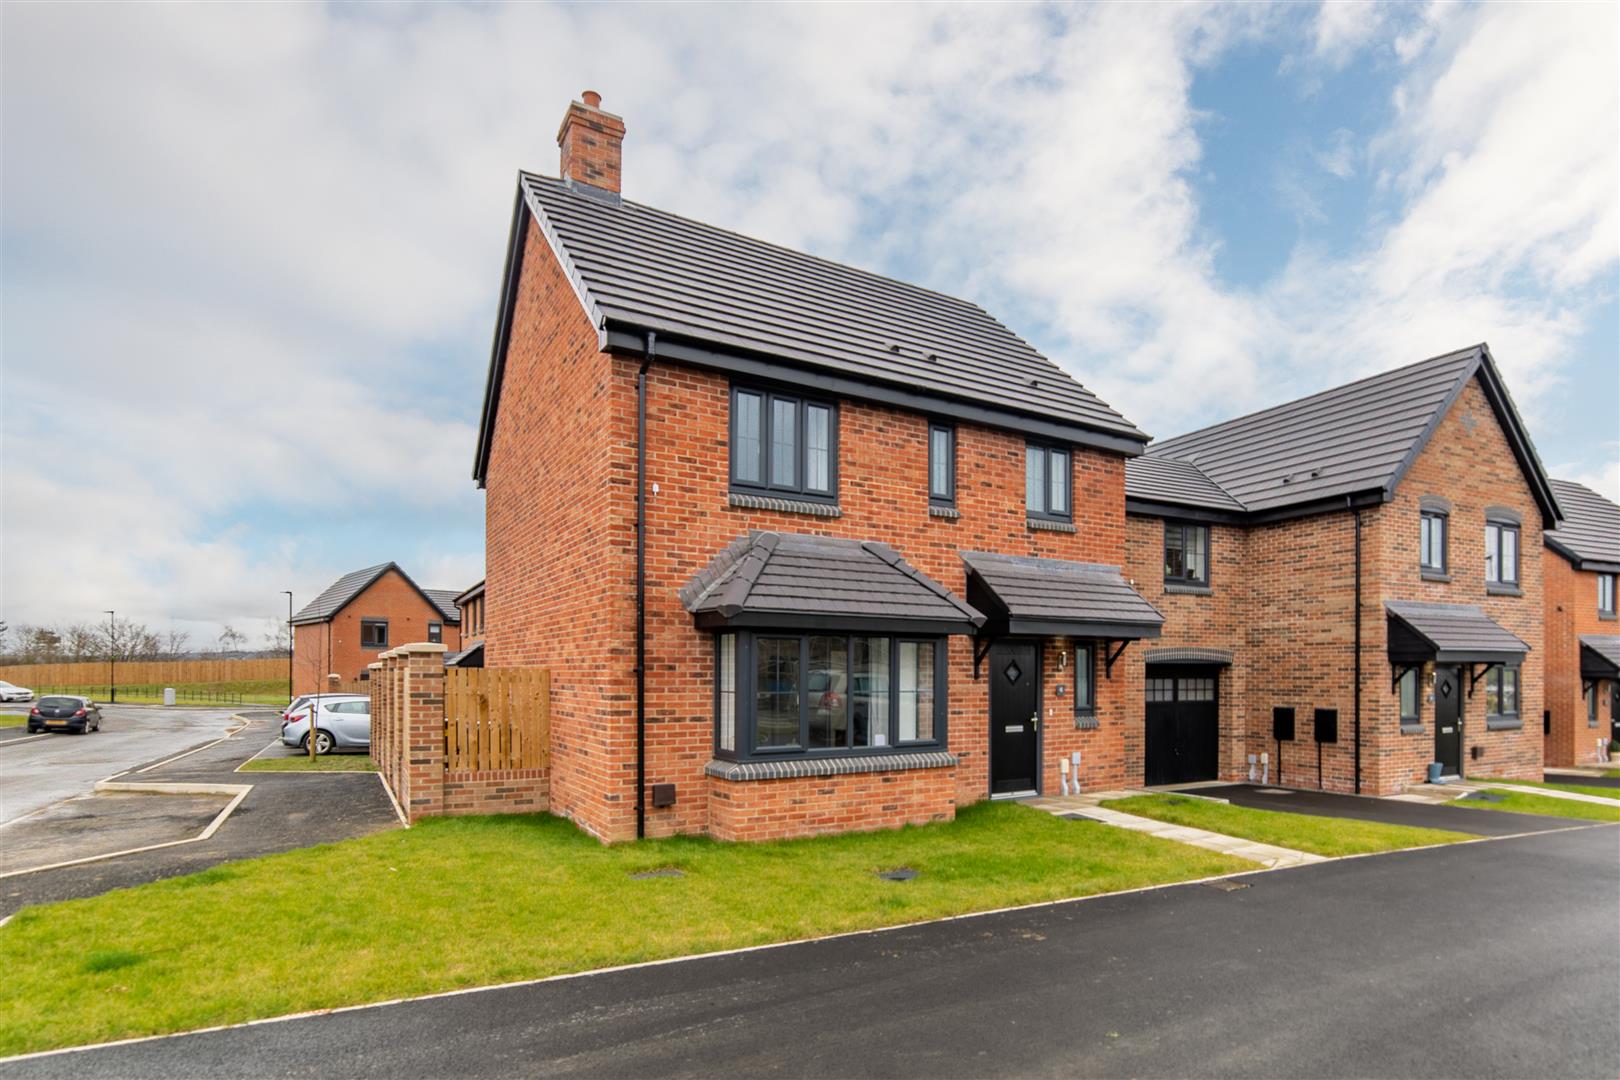 3 bed detached house for sale in Osprey Avenue, Newcastle Upon Tyne, NE15